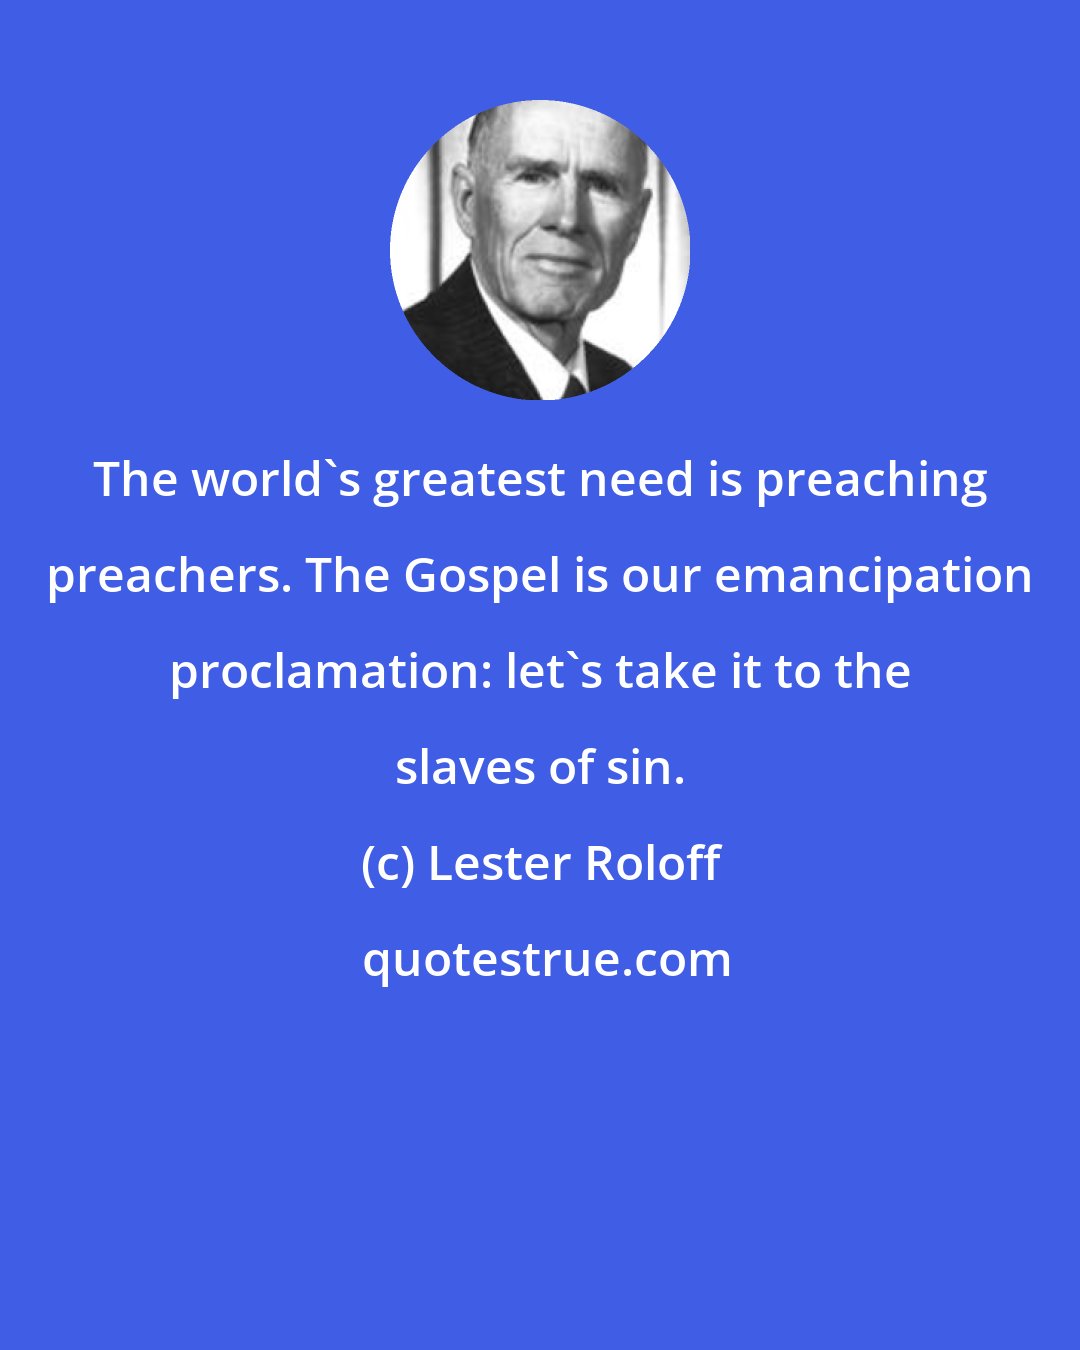 Lester Roloff: The world's greatest need is preaching preachers. The Gospel is our emancipation proclamation: let's take it to the slaves of sin.